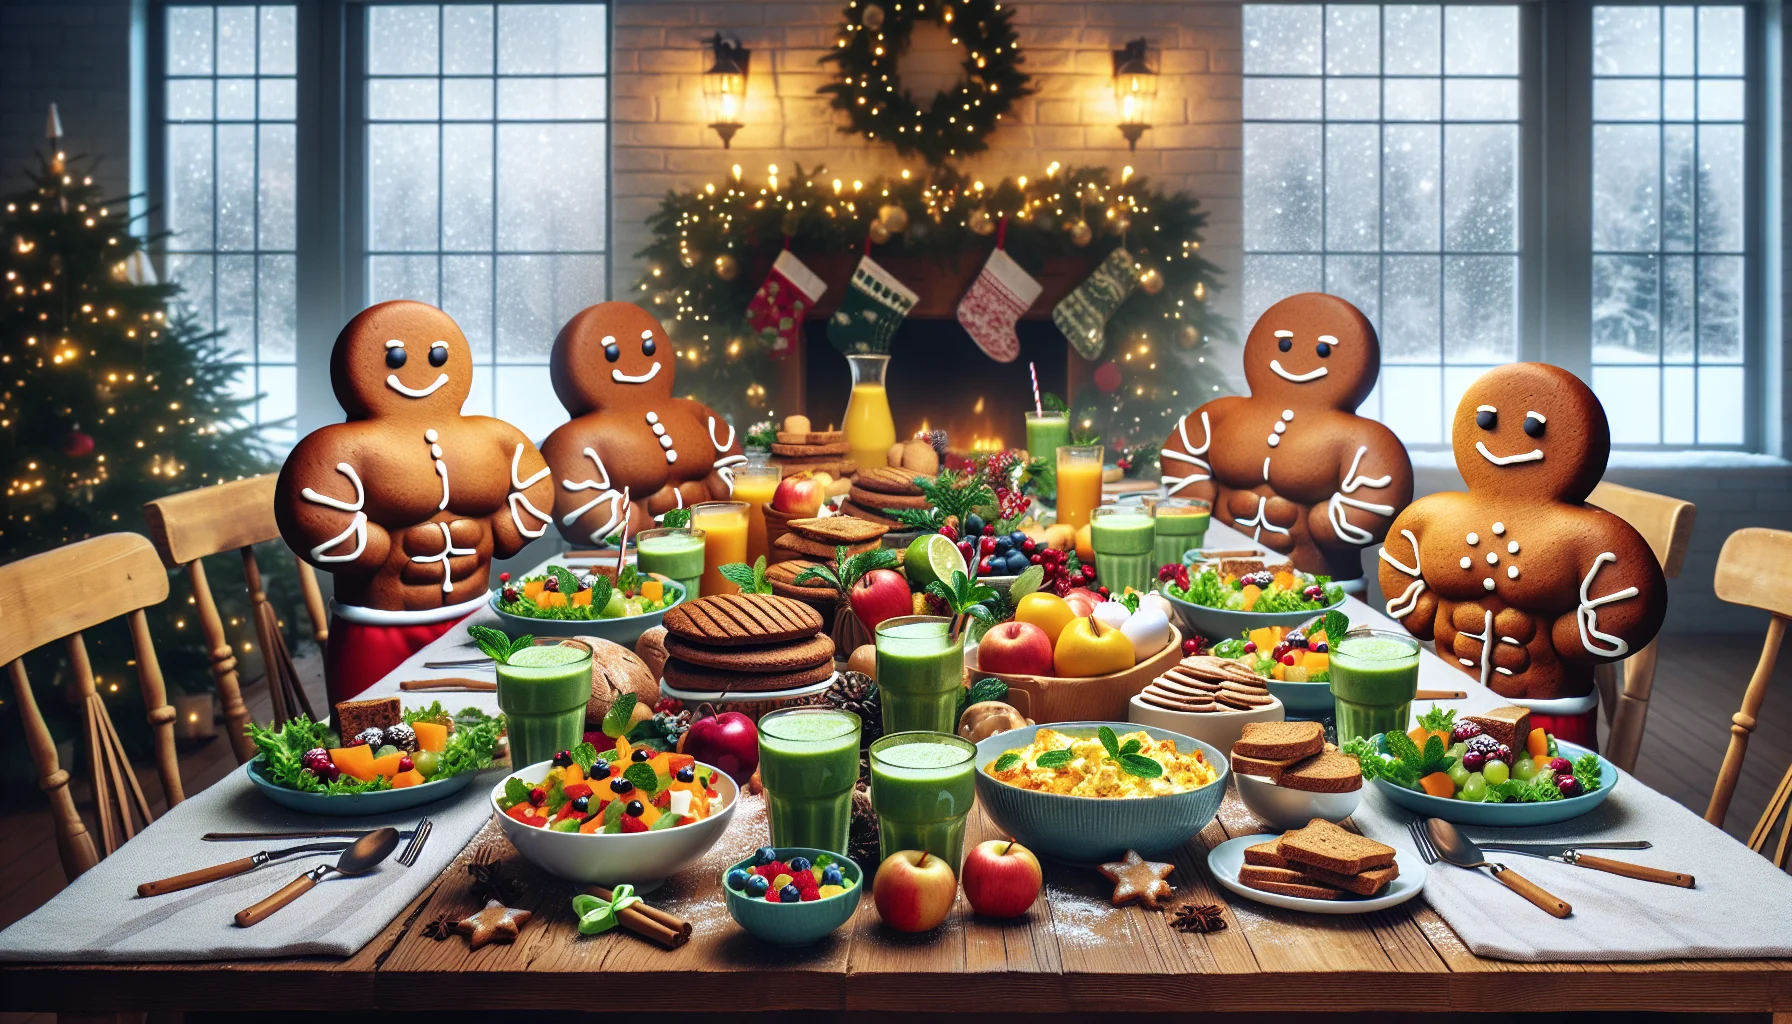 Create a jovial image that captures a special Christmas Eve breakfast scene. Picture a long wooden table laden with numerous healthy dishes that are pleasing to the eye and wallet. Crisp green salads, vibrant bowls of fruit, freshly baked whole grain bread, minty green smoothies, and serving bowls brimming with scrambled egg whites dot the table. In a humorous twist, chubby gingerbread men, resembling fitness trainers, are posed around the table, cheerfully encouraging individuals to partake in the feast. The setting is festive, with twinkling Christmas lights dancing on the backdrop, a tall Christmas tree, and snowflakes gently falling outside the windows.